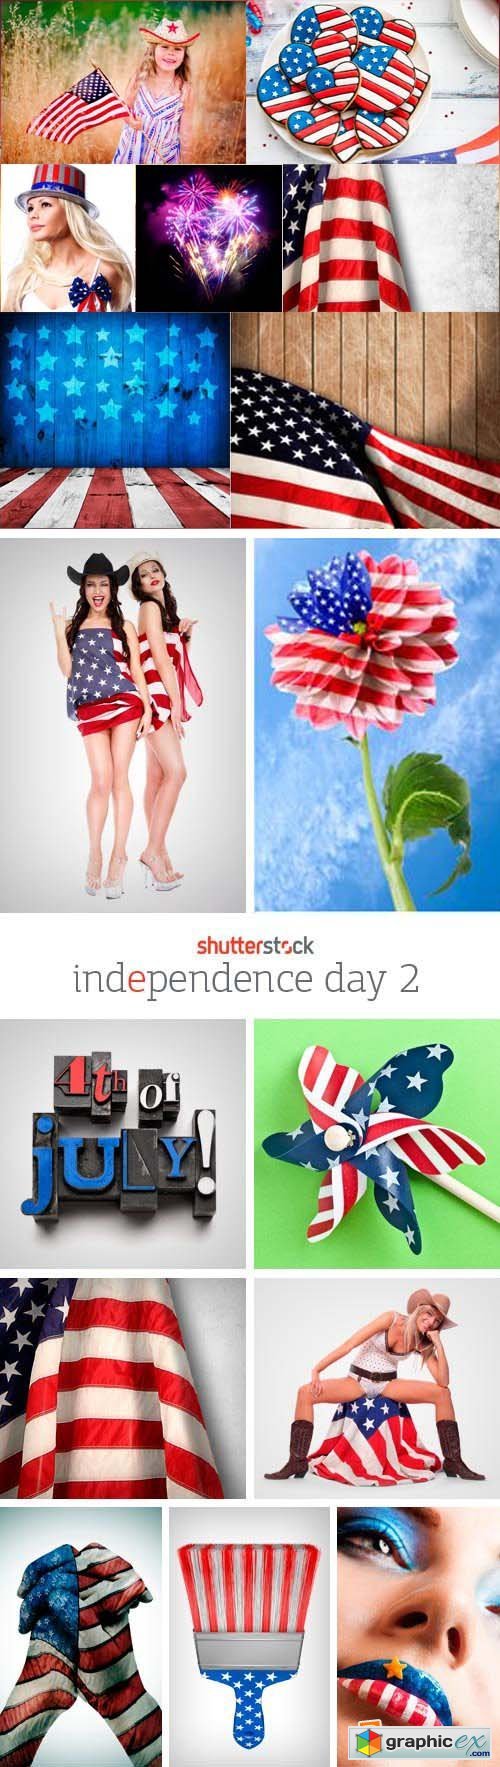 Independence Day 2, 25xJPG